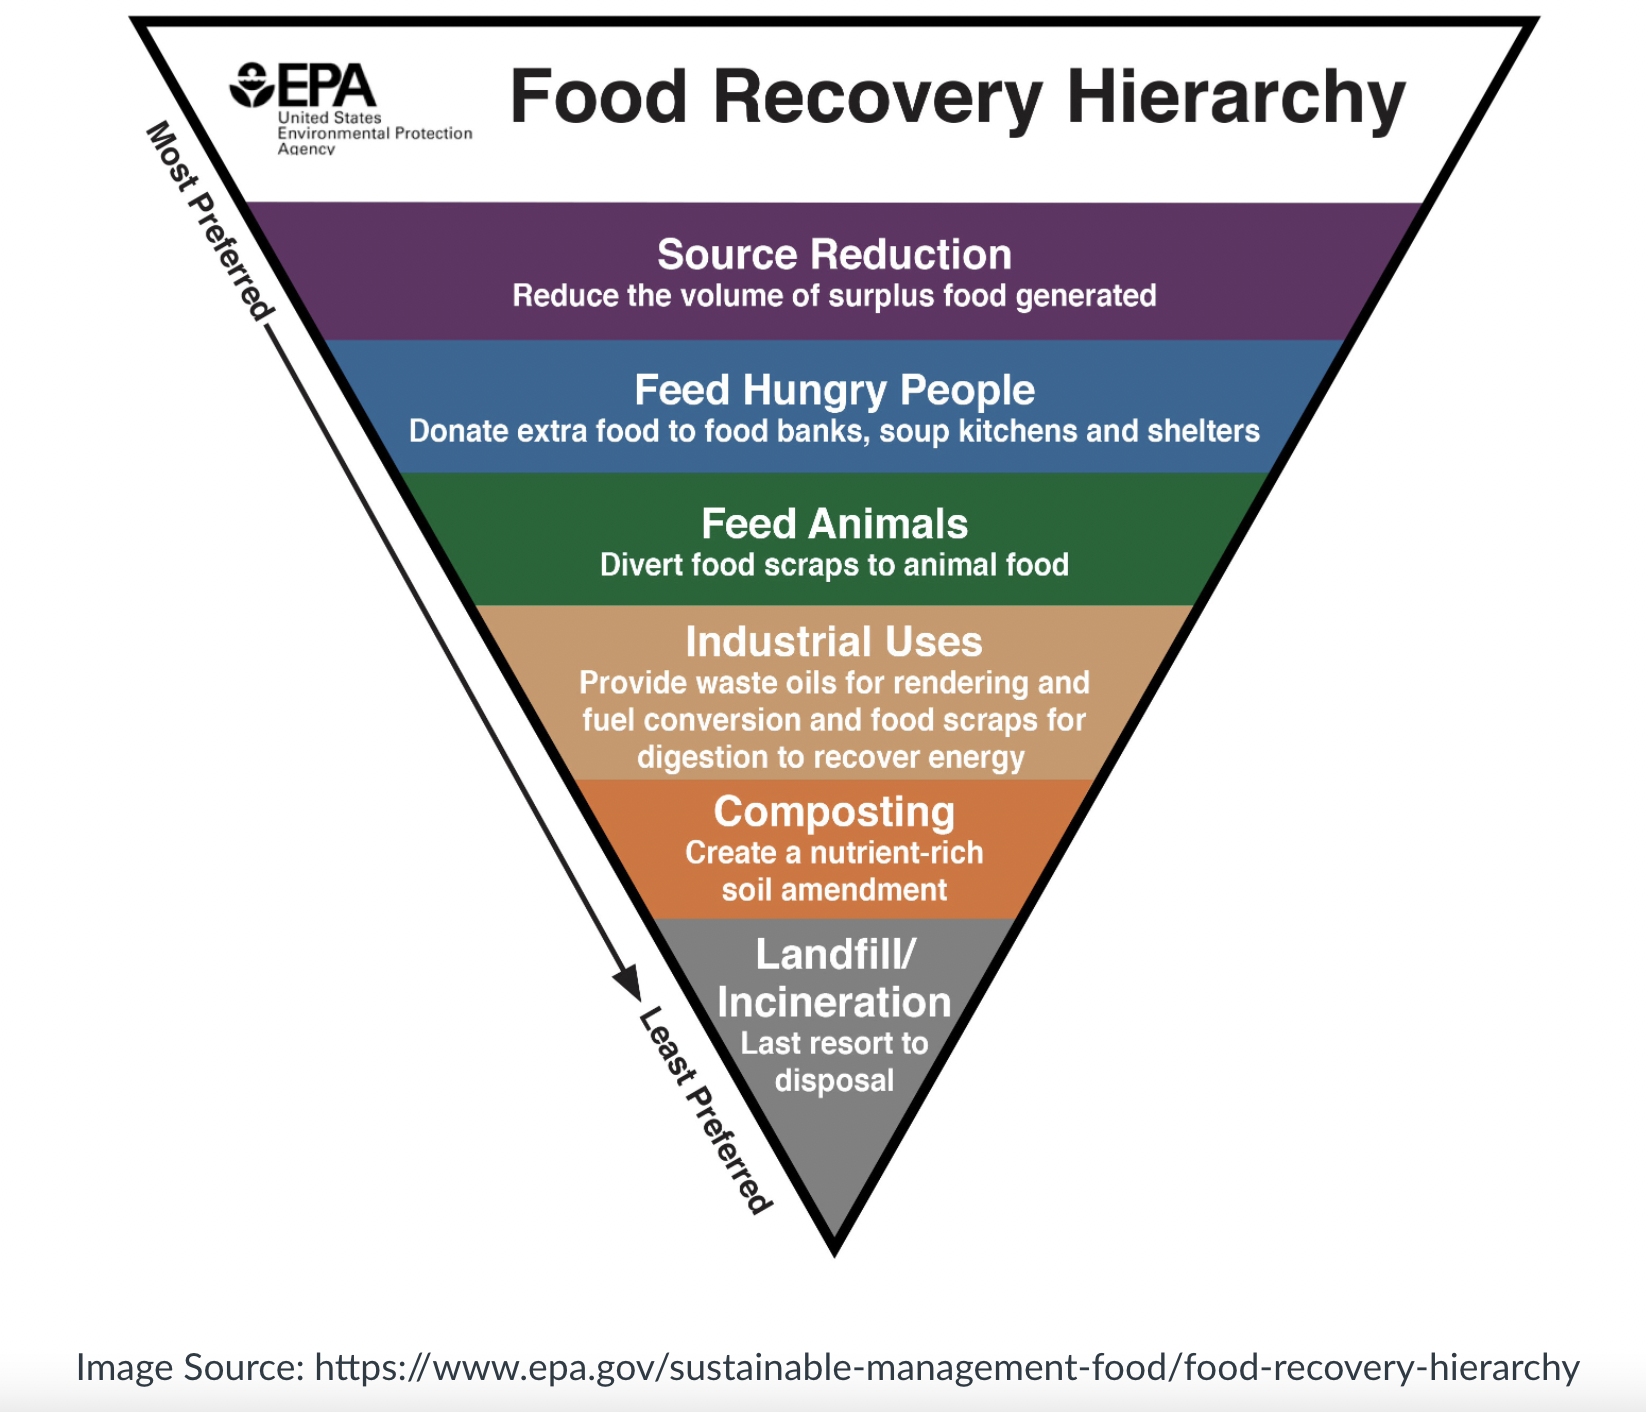 Food Recovery Hierarchy